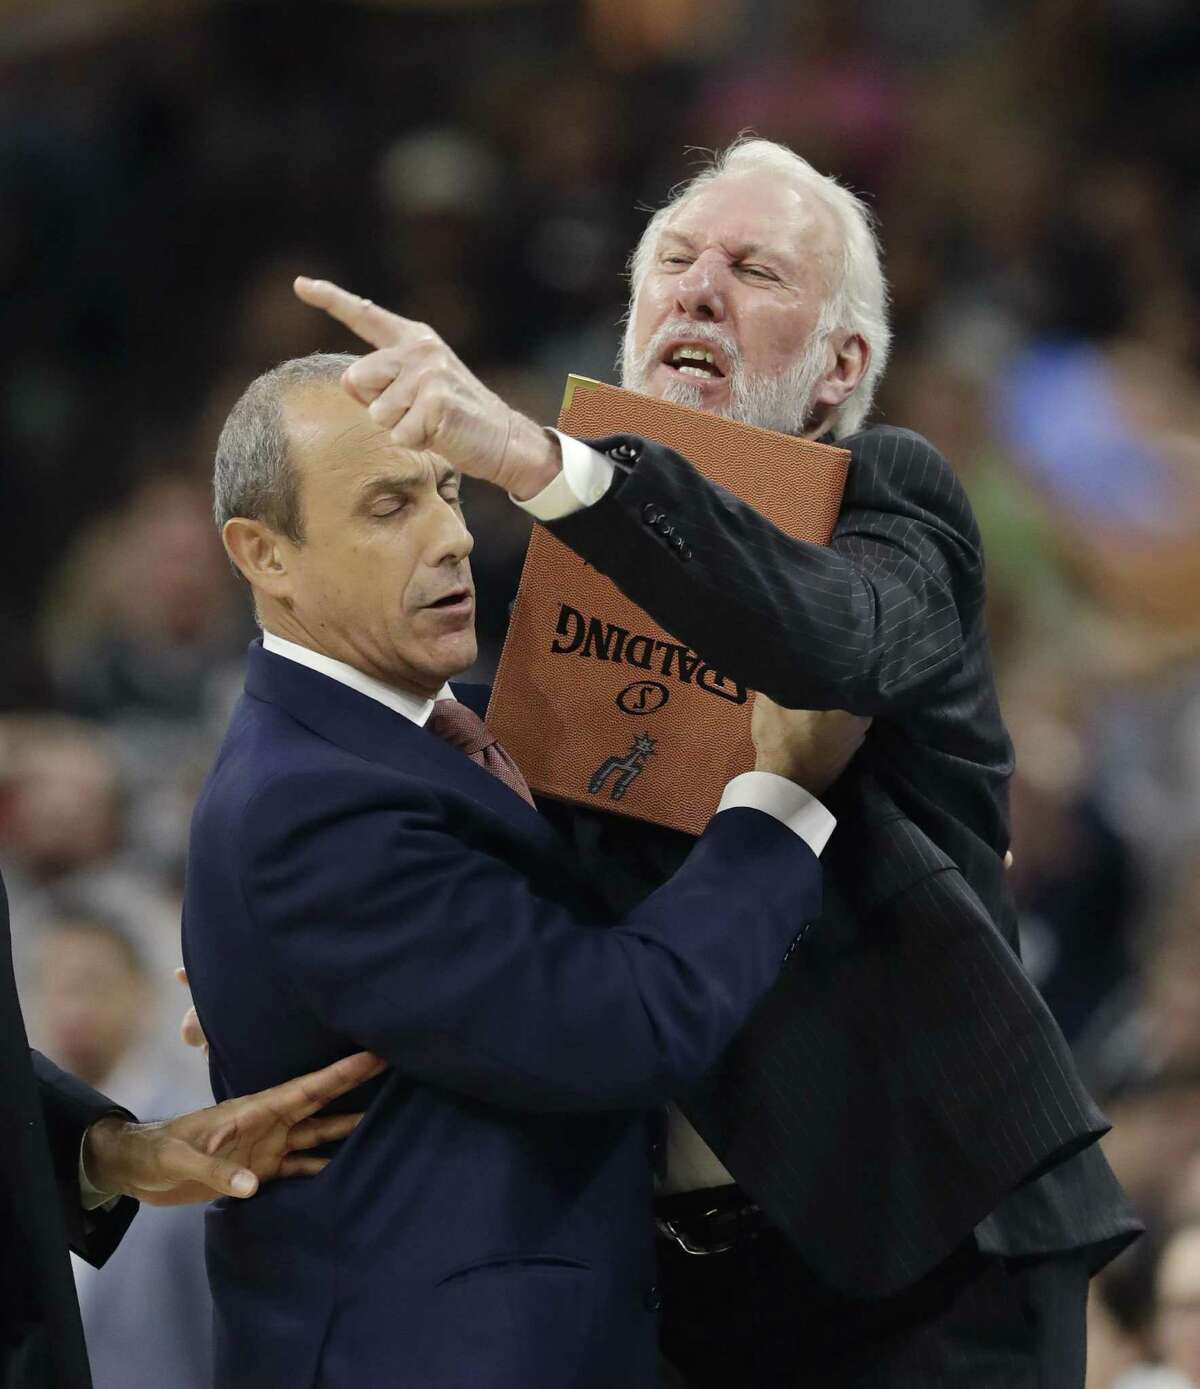 Spurs coach Gregg Popovich is held back by assistant coach Ettore Messina as he argues an official’s call during the first half against the Los Angeles Clippers on Nov. 5, 2016, in San Antonio.